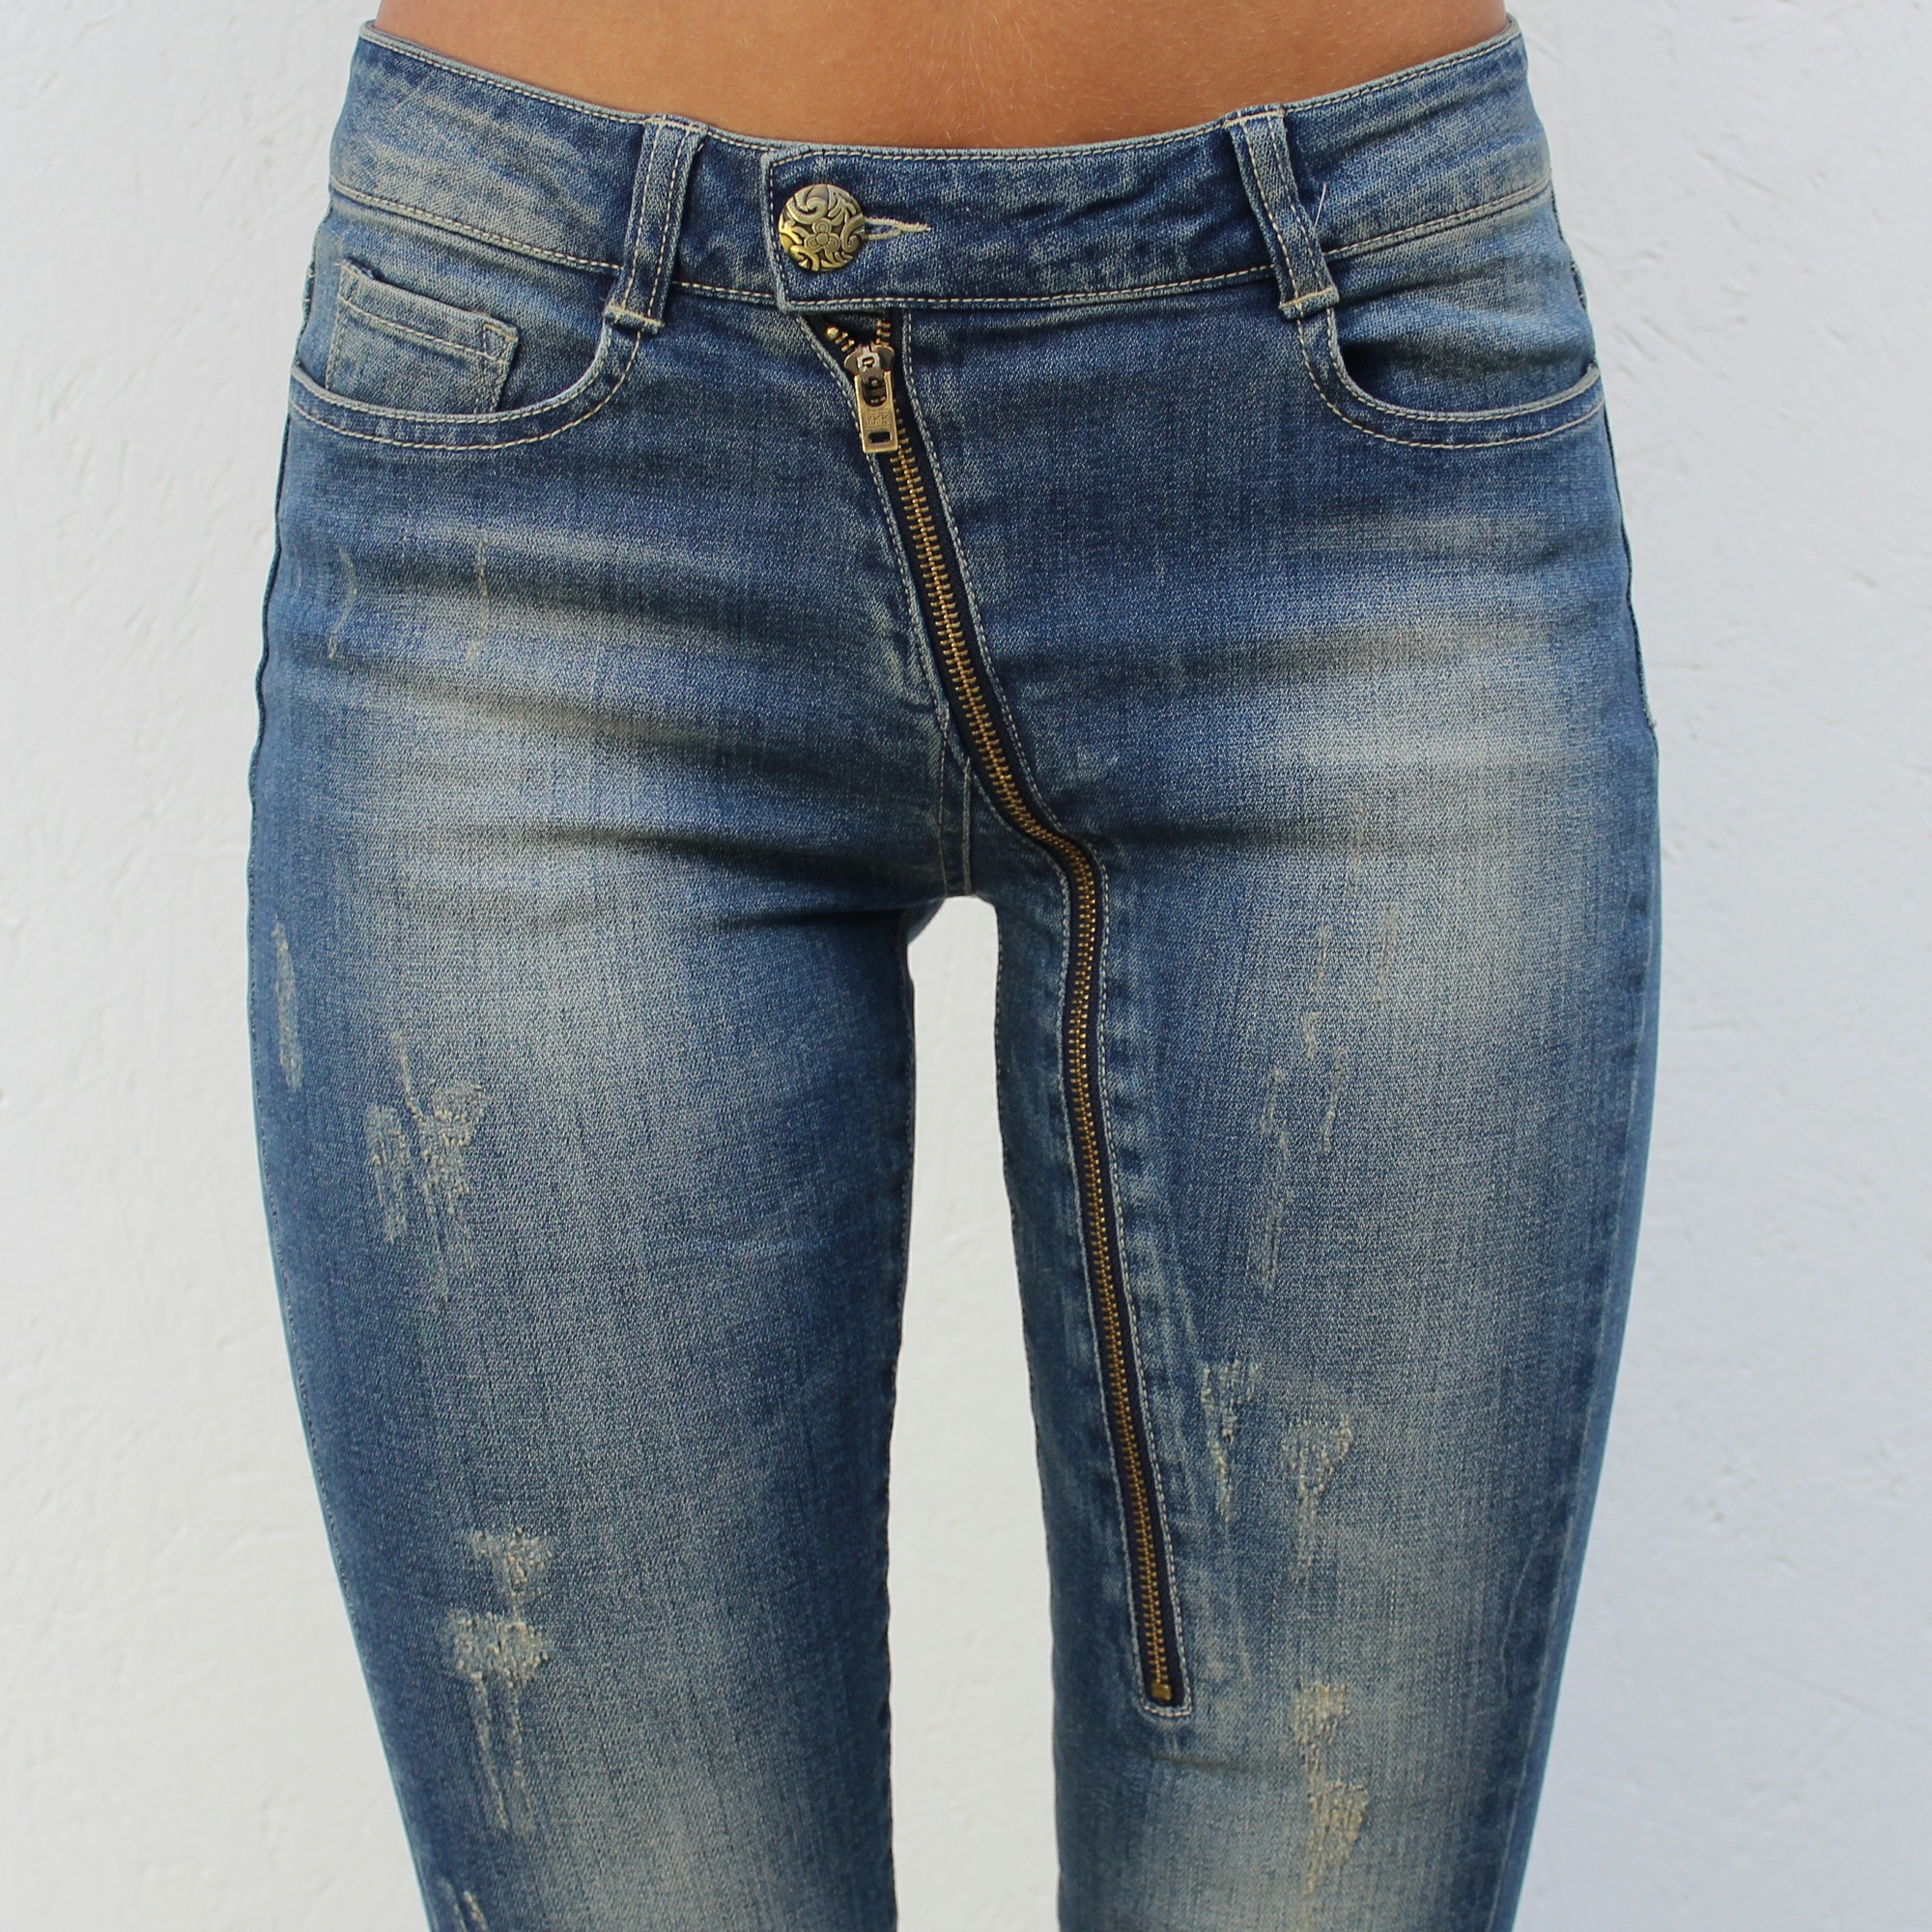 Free Photo Blue Jeans Zipper Clothes Fabric Jeans Free Download Jooinn